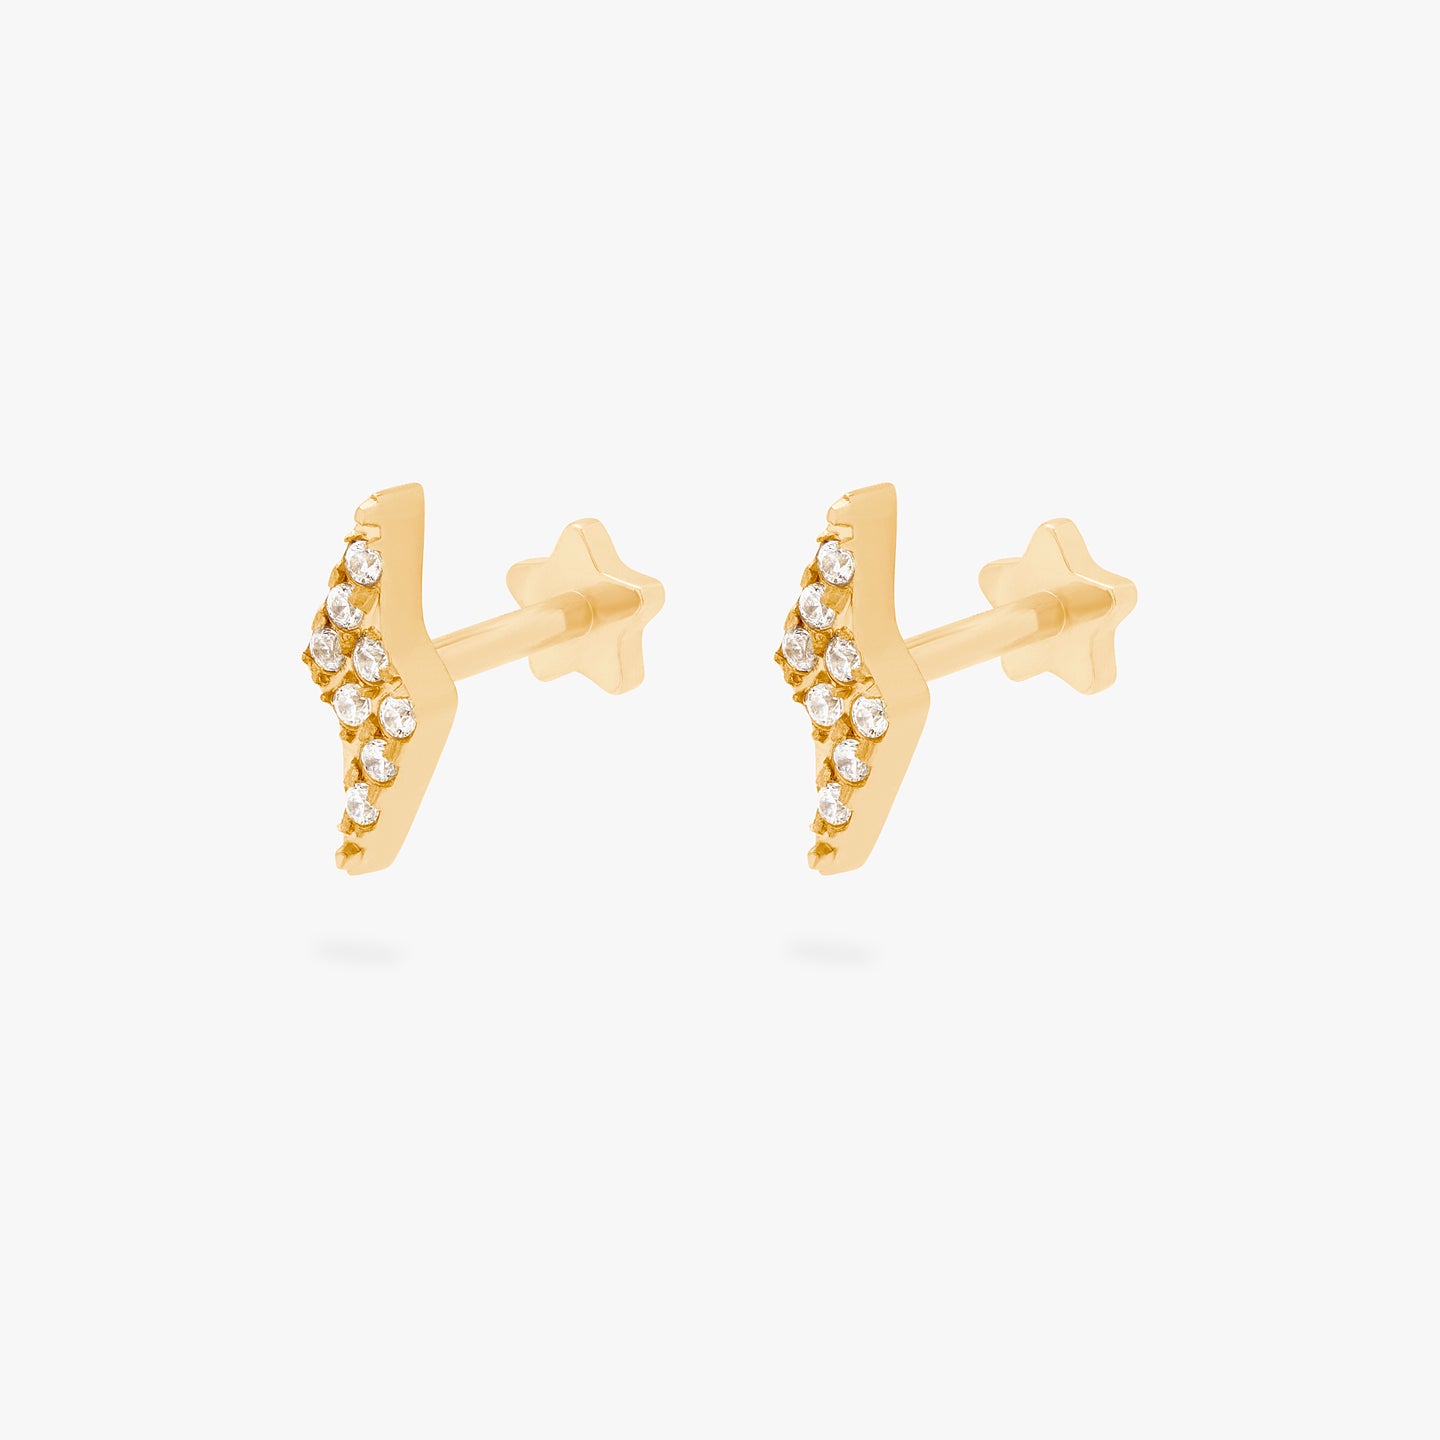 This is an image of a pair of gold/clear pave lightning-bolt shaped flatback tops with gold labrets that have star-shaped discs. [pair] color:null|gold/clear